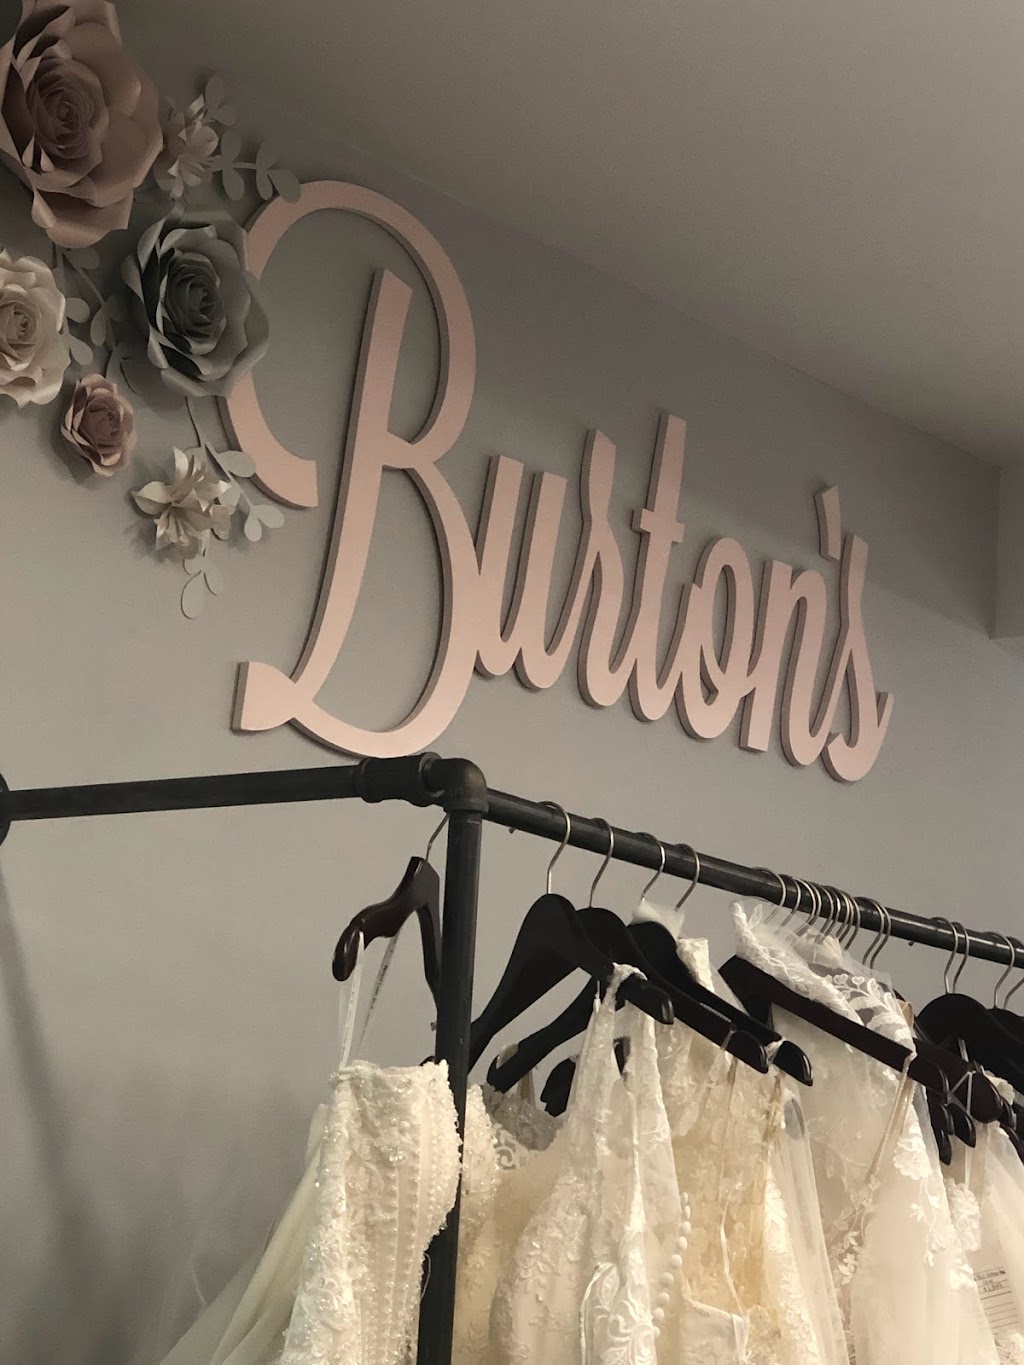 Burtons Bridals | 426 Old Walt Whitman Rd, Melville, NY 11747 | Phone: (631) 424-3377